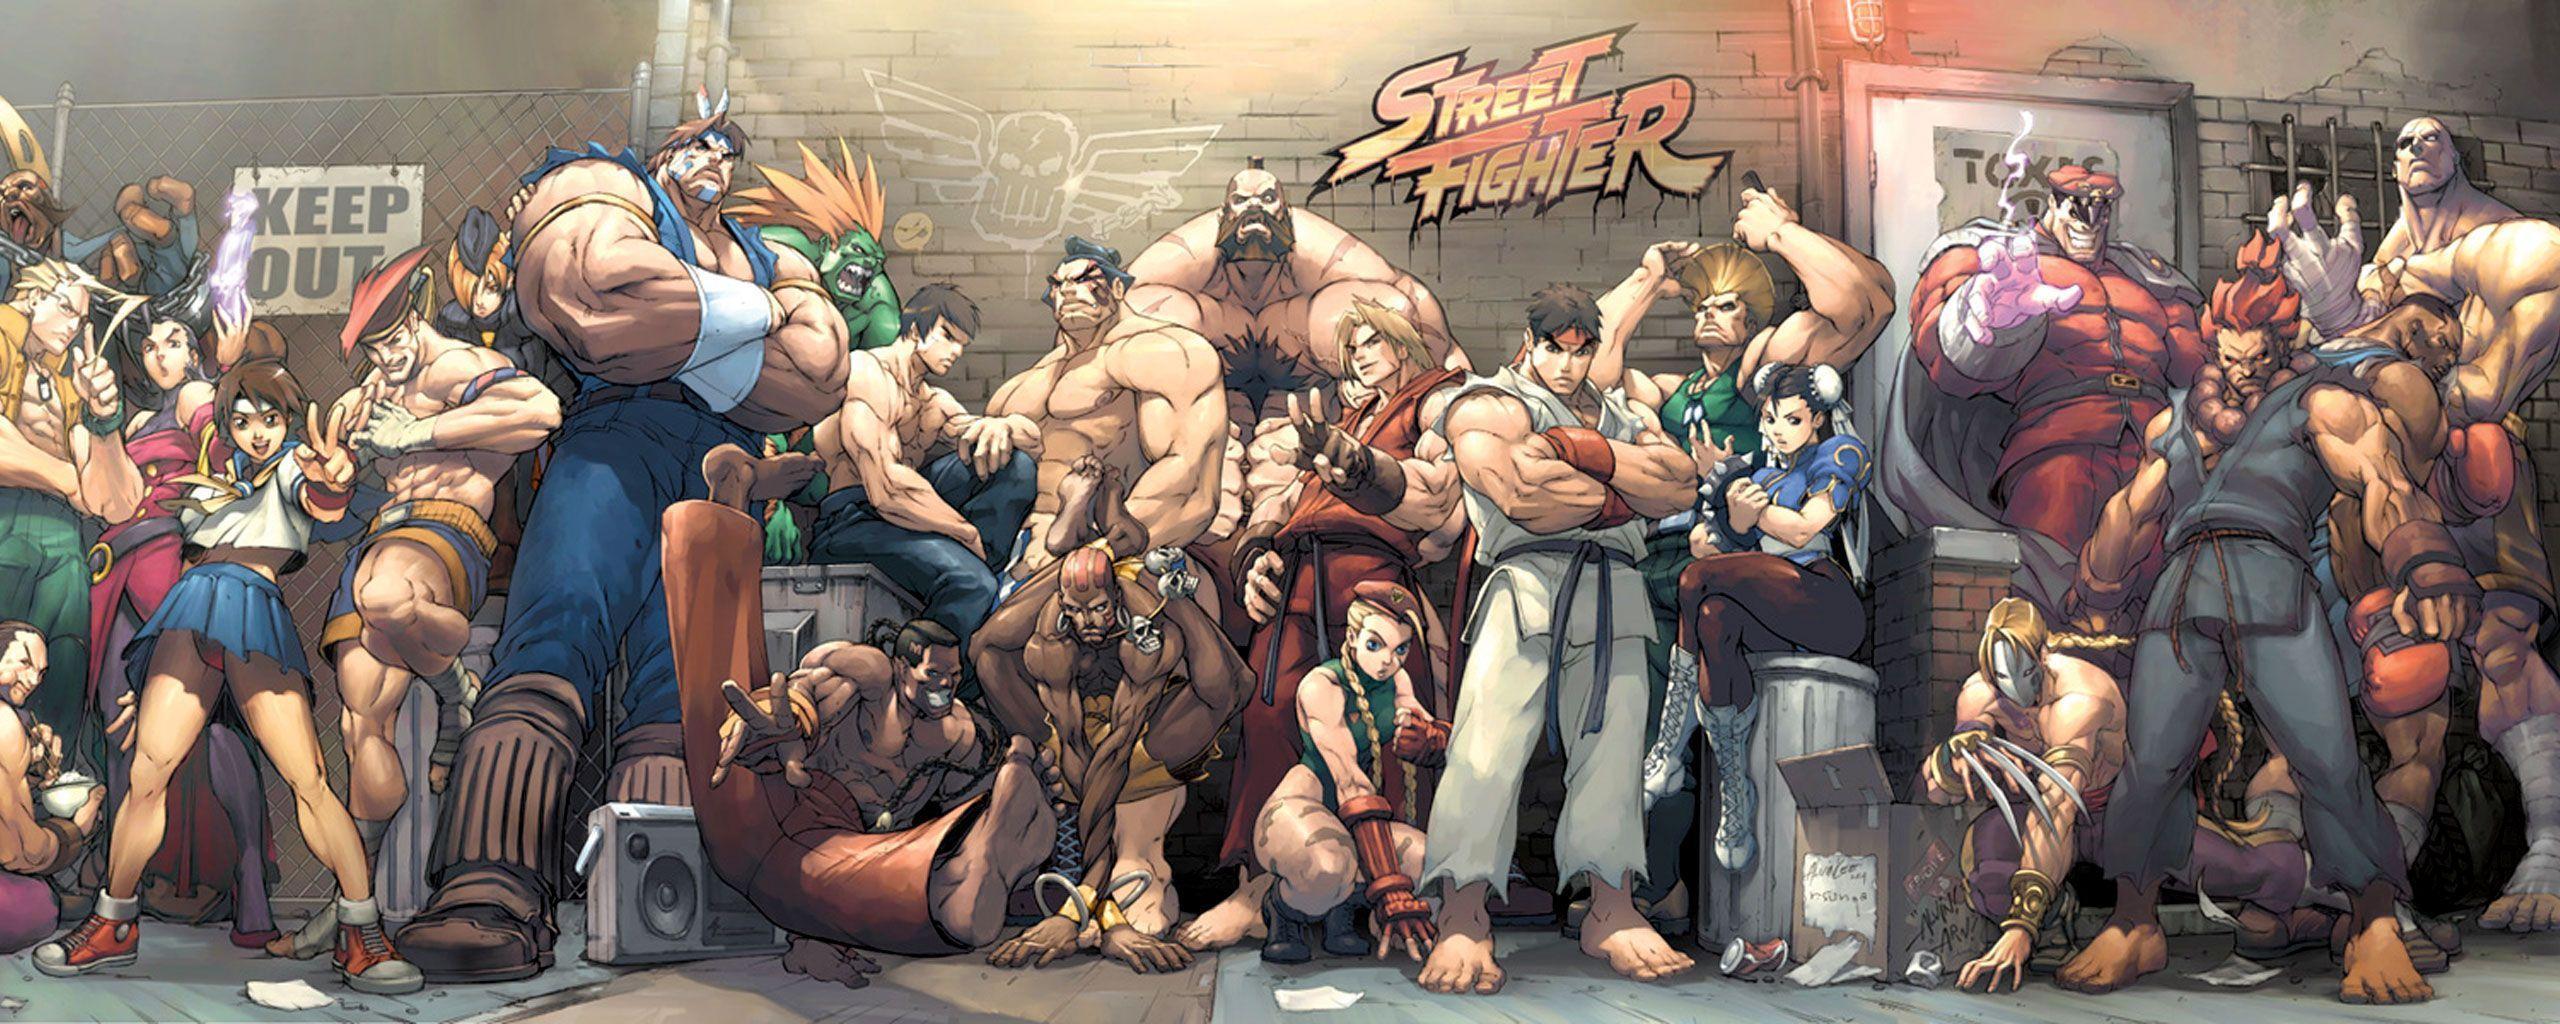 Free download Street Fighter HD Wallpapers [2560x1024] for your 2560x1024